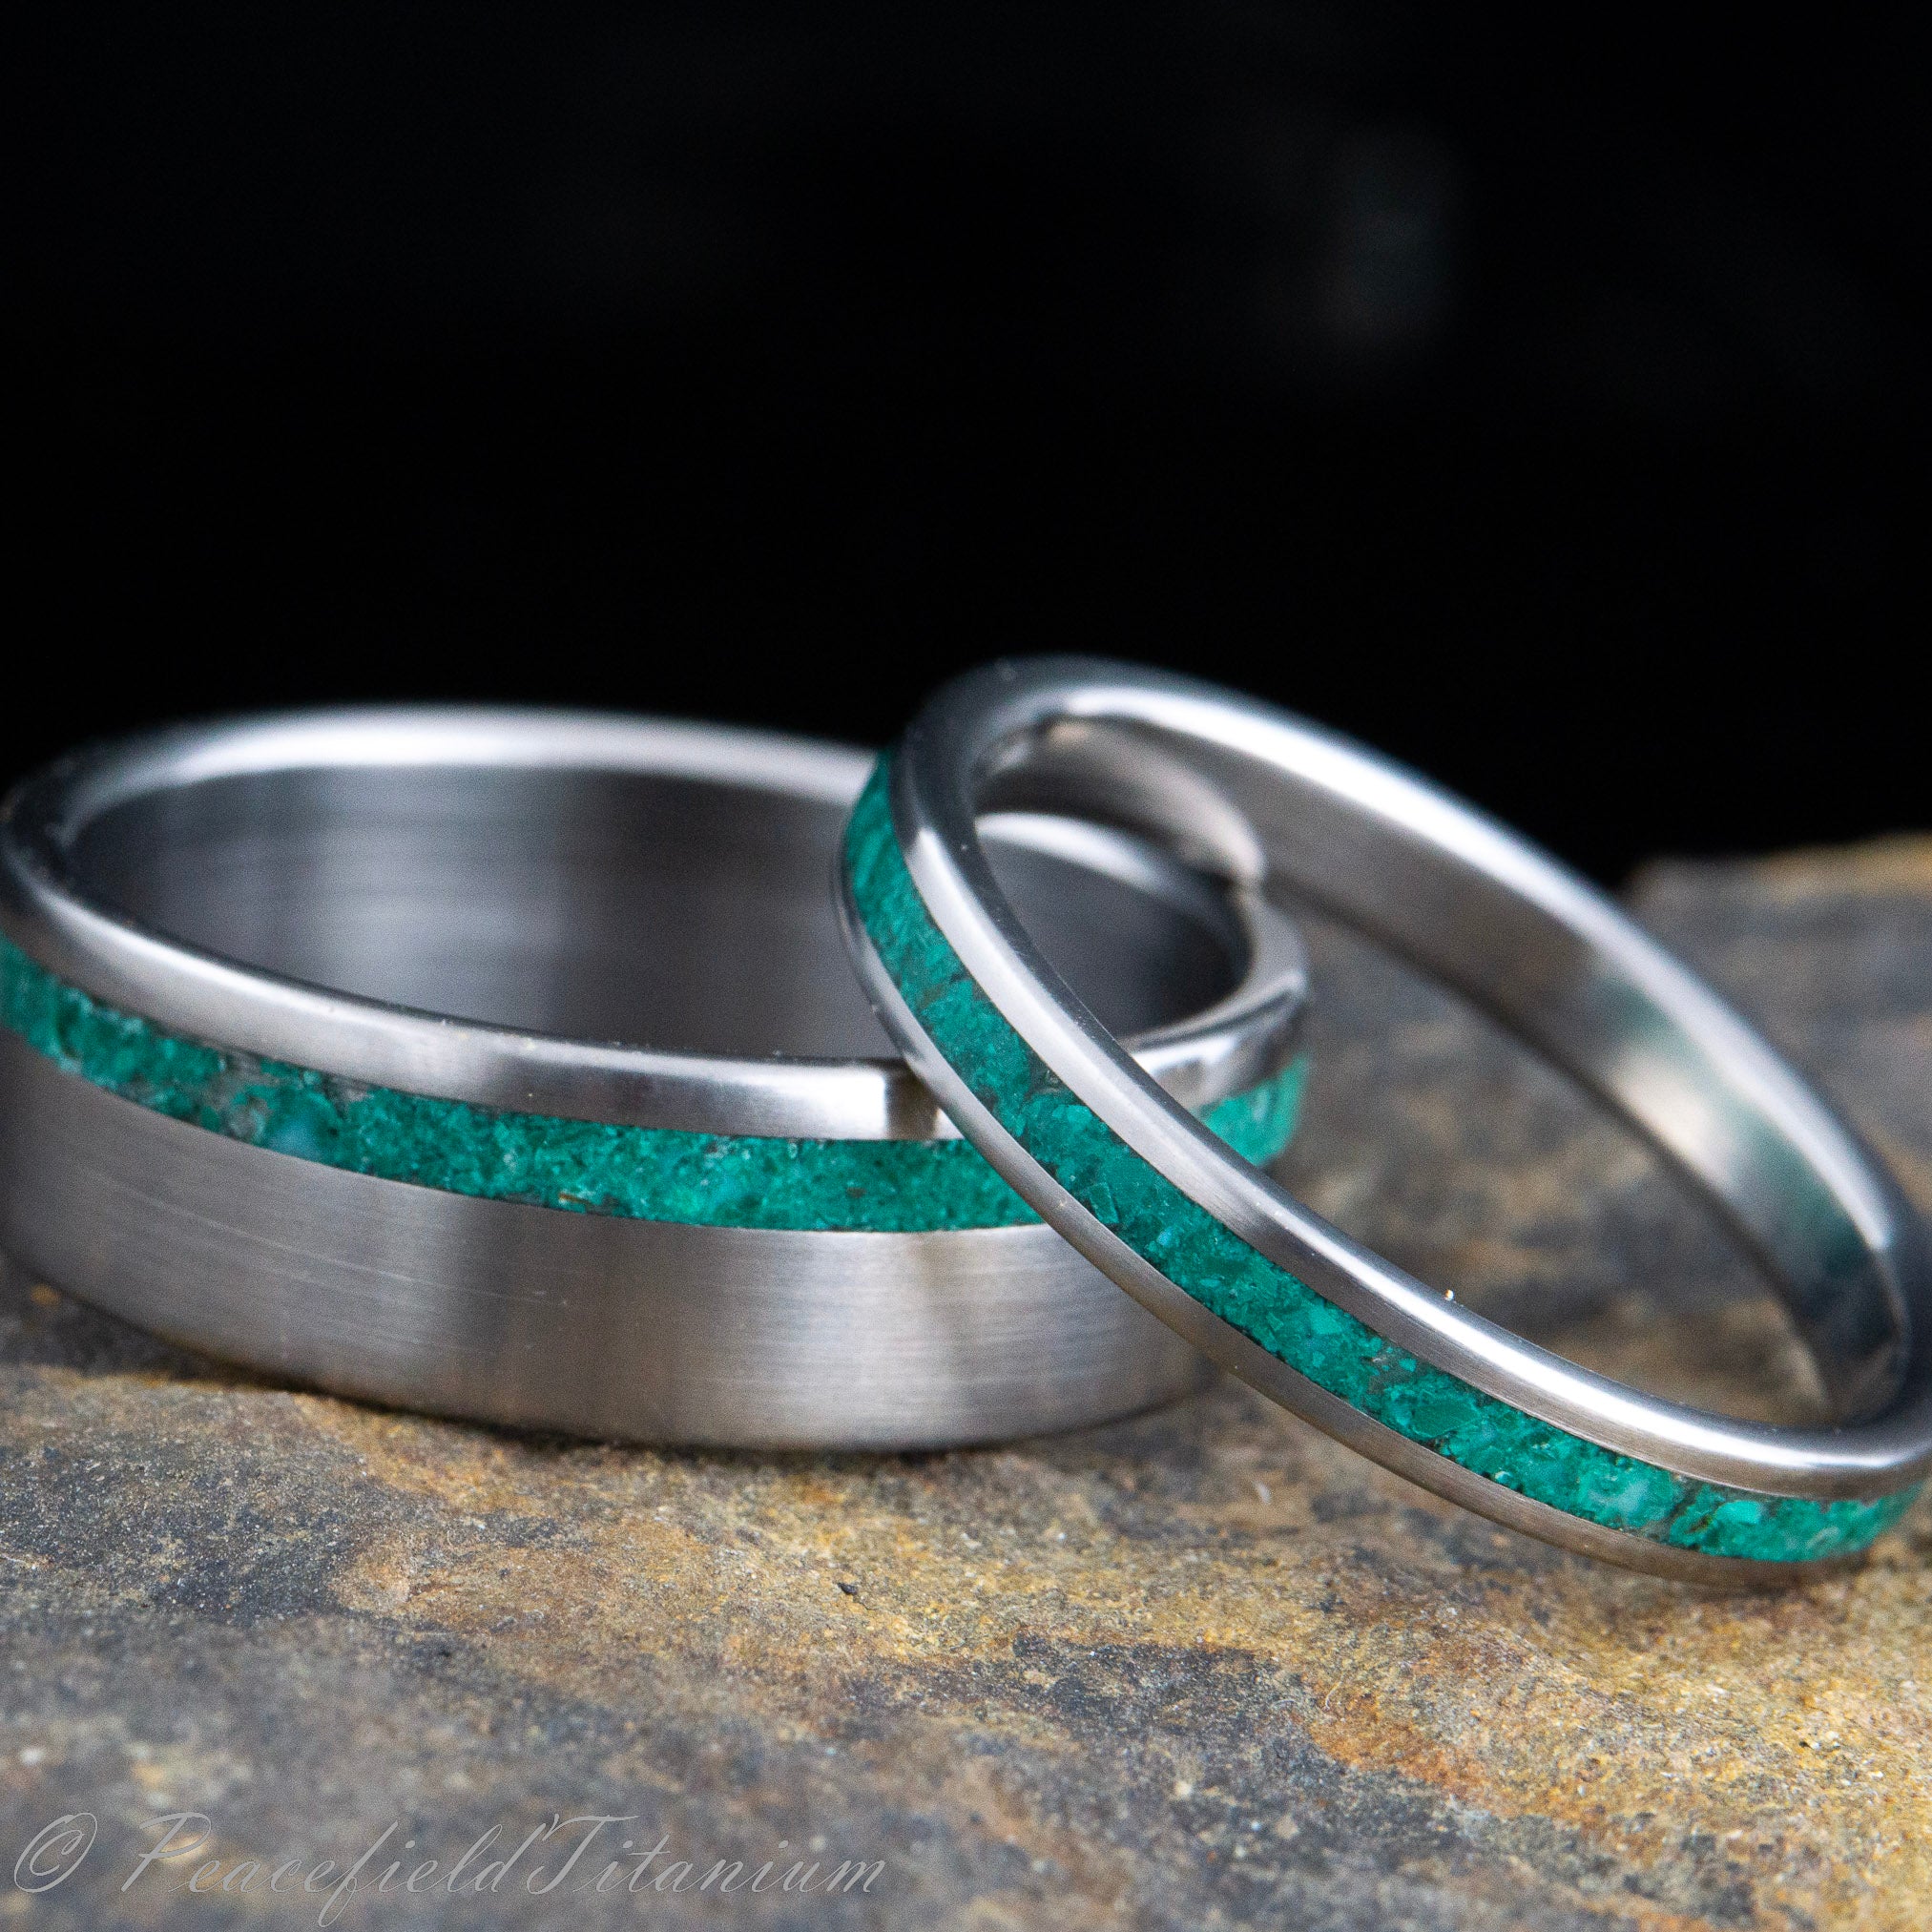 Wedding rings with natural stone inlays